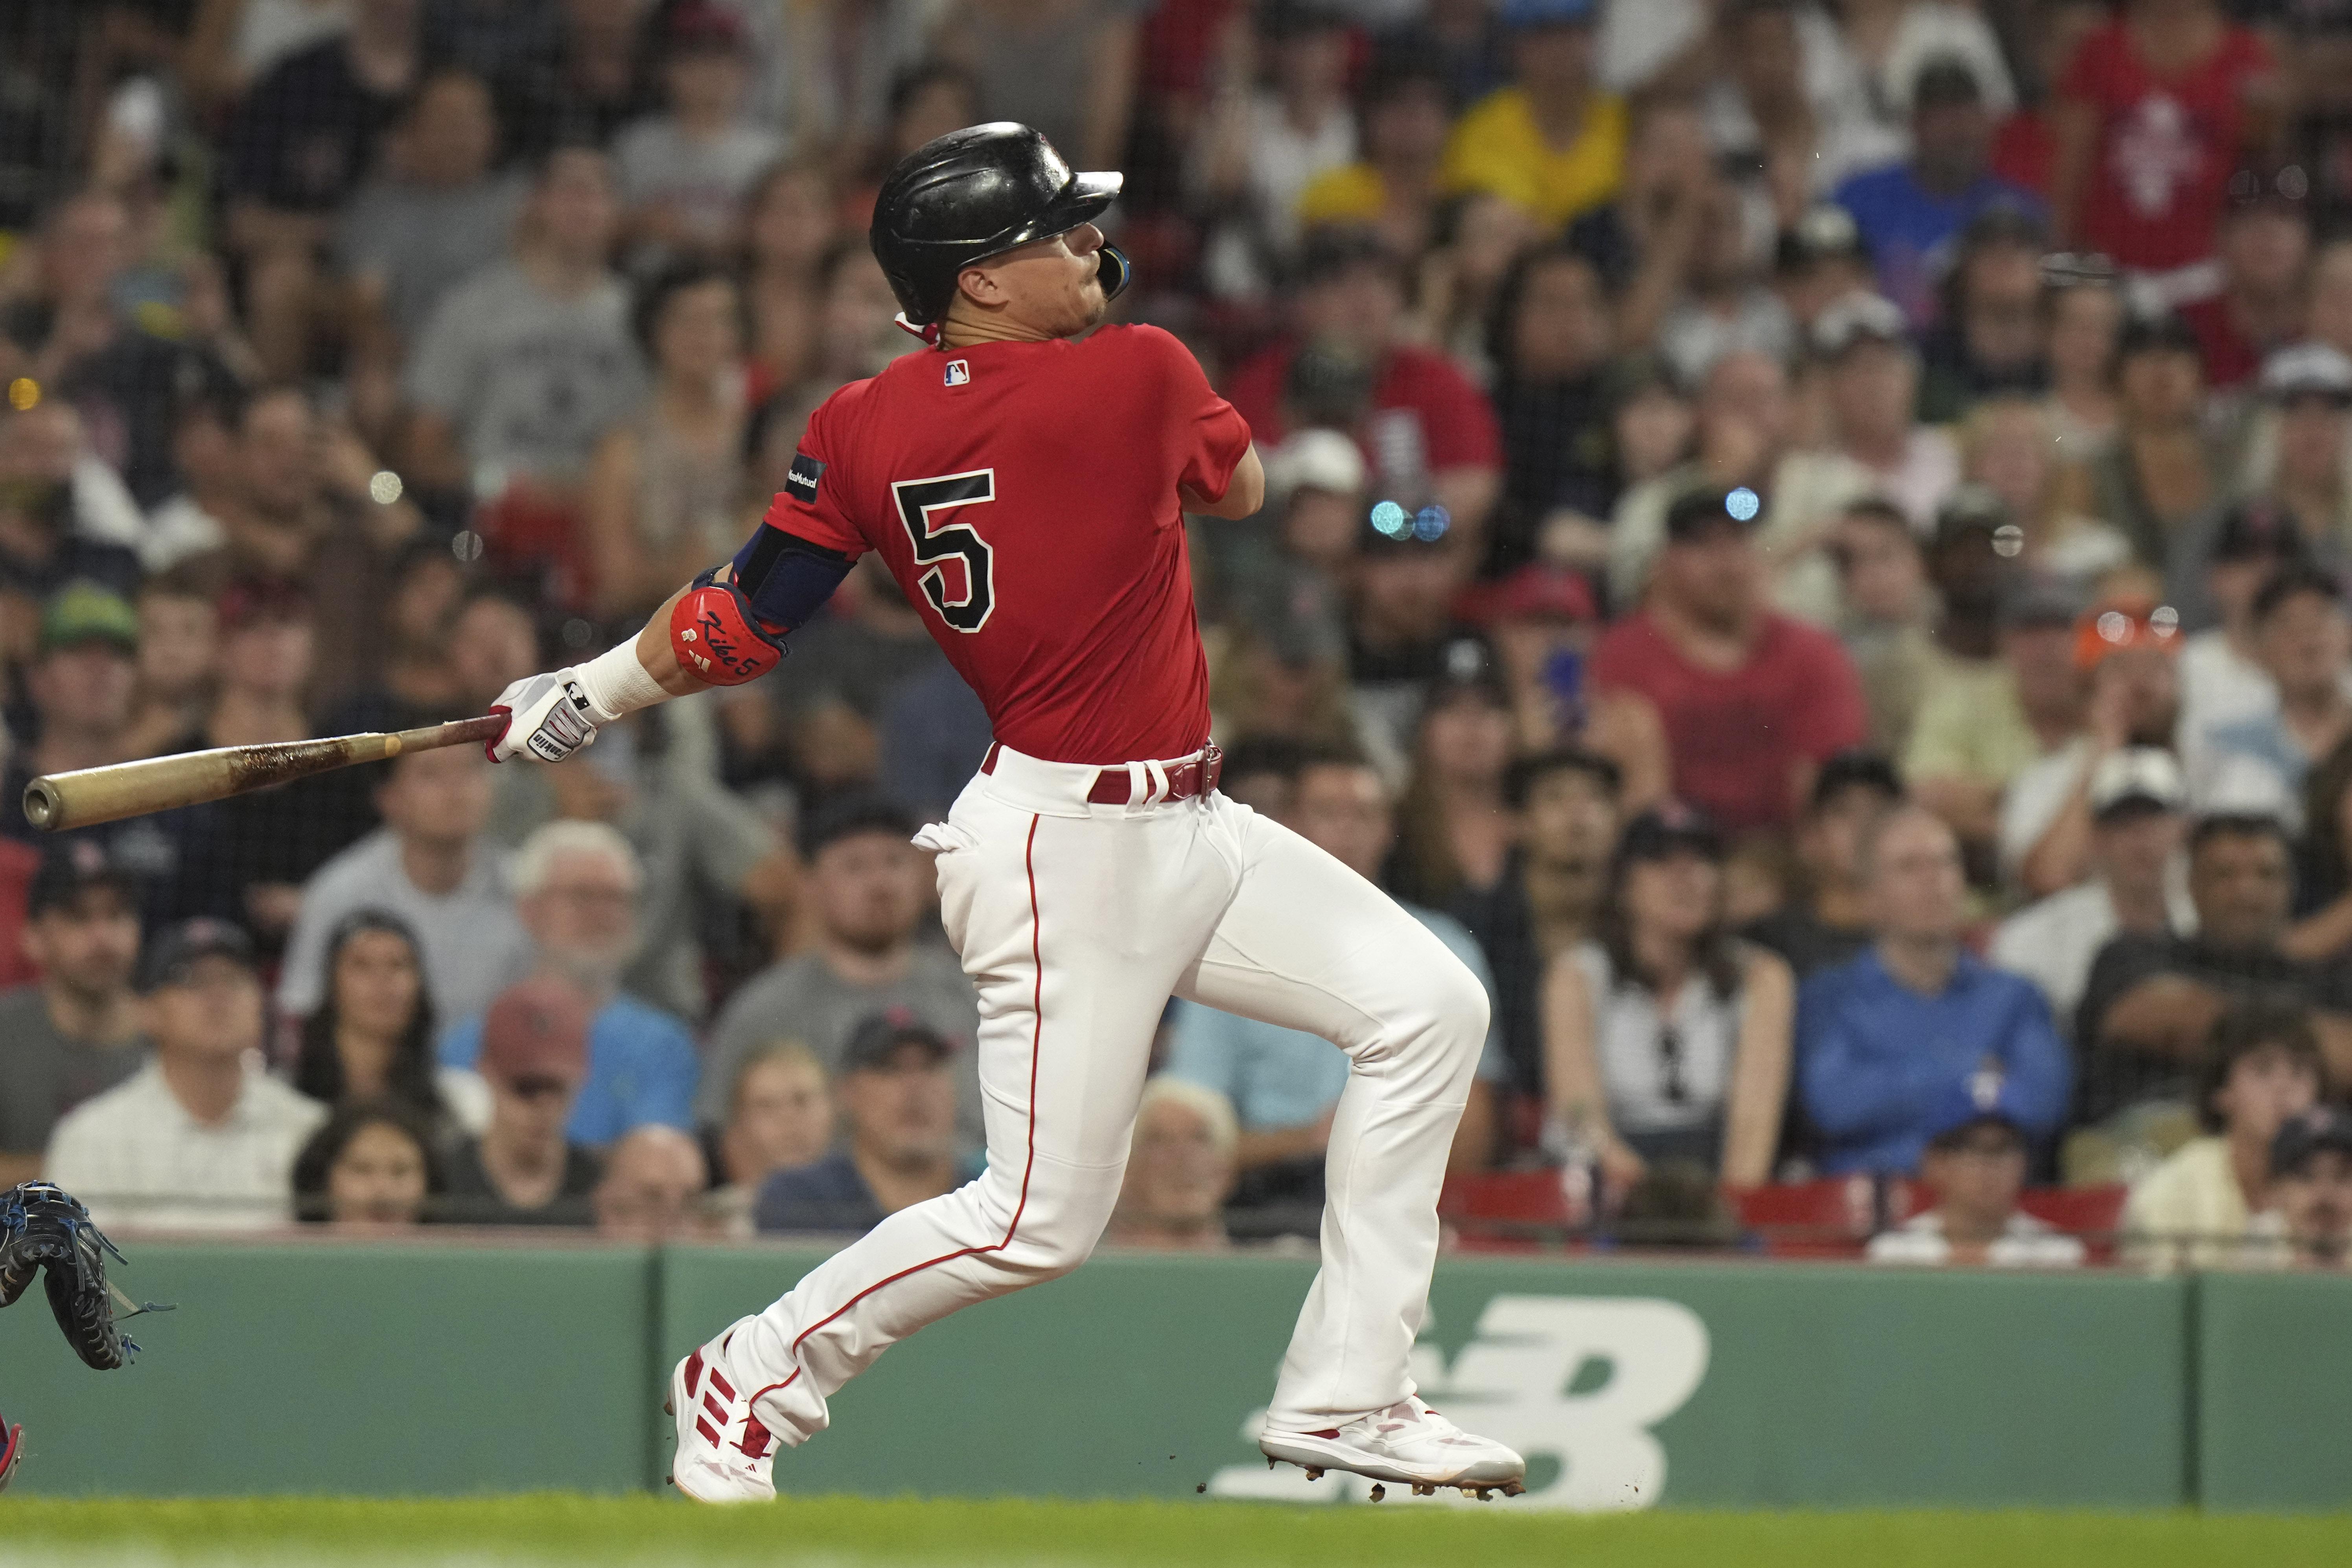 Red Sox score 5 runs in 7th inning, avoid sweep with 6-3 win over Rockies